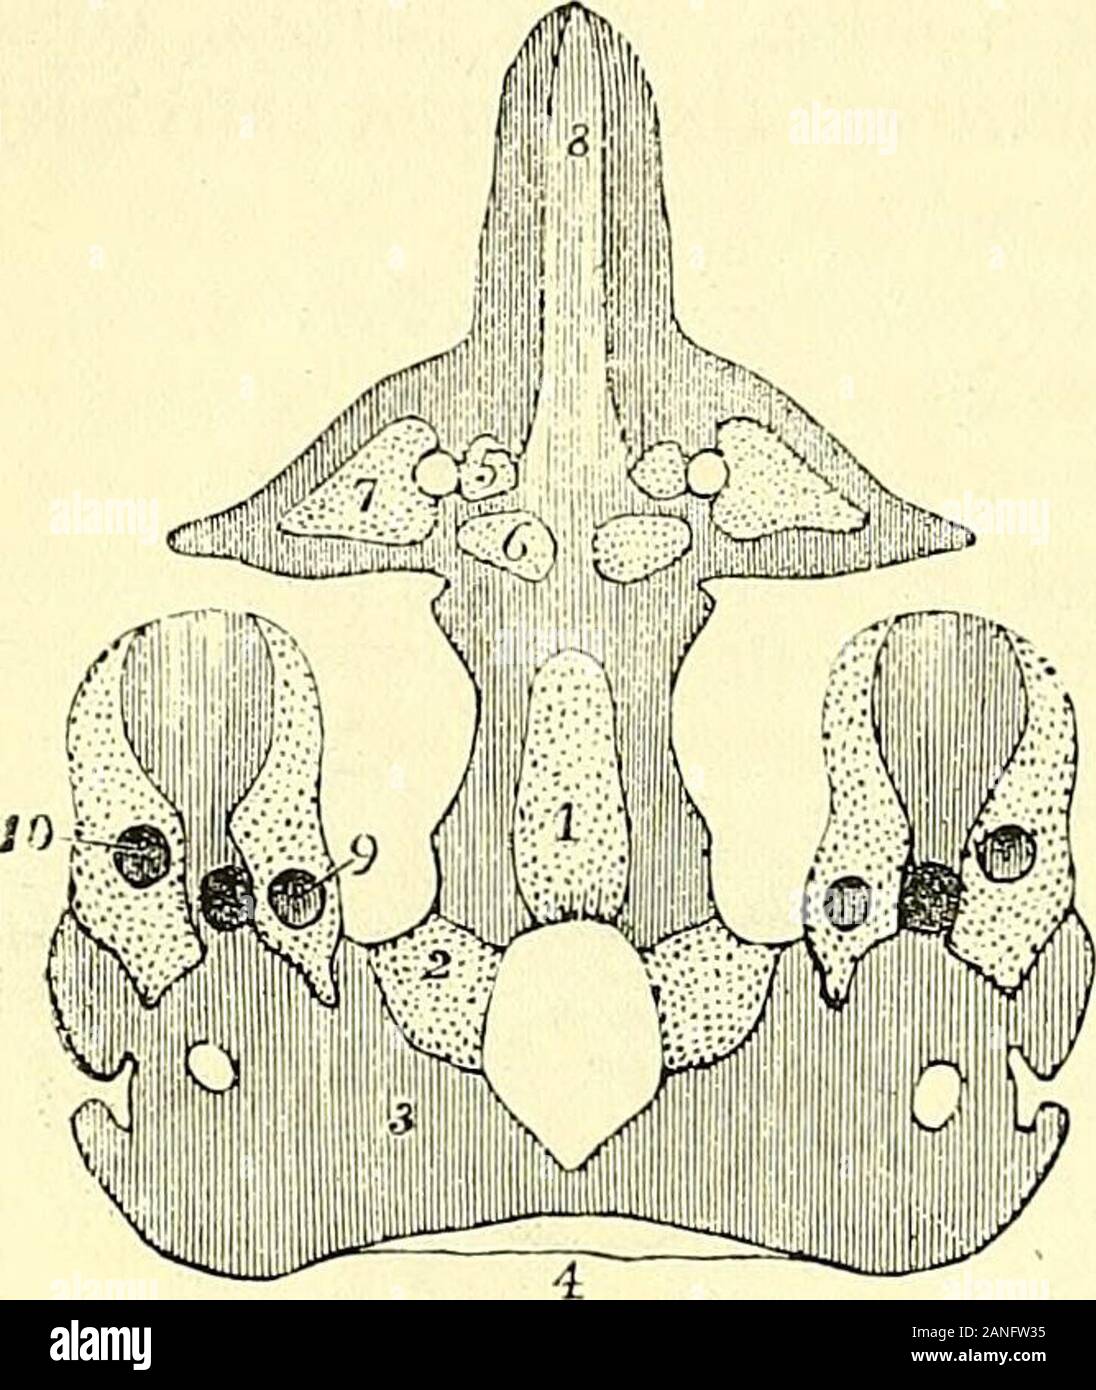 Quain's elements of anatomy . nous wall Avhich is continuous with the parachordalcartilage and seems to take the place of that cartilage as a part of thegeneral cranial wall. While the base of the cranium, to the extent already mentioned, iscartilaginous in its origin, the lateral and upper walls are chiefly ofmembranous formation, as in the squama occipitis, the squamo-zygomaticof the temporal, the parietal and the frontal bones. The membranous tissue in which these flat bones of the cranial vaultare formed is regarded by Kolliker as of dermal origin, and the bones asbelonging to the group of Stock Photo